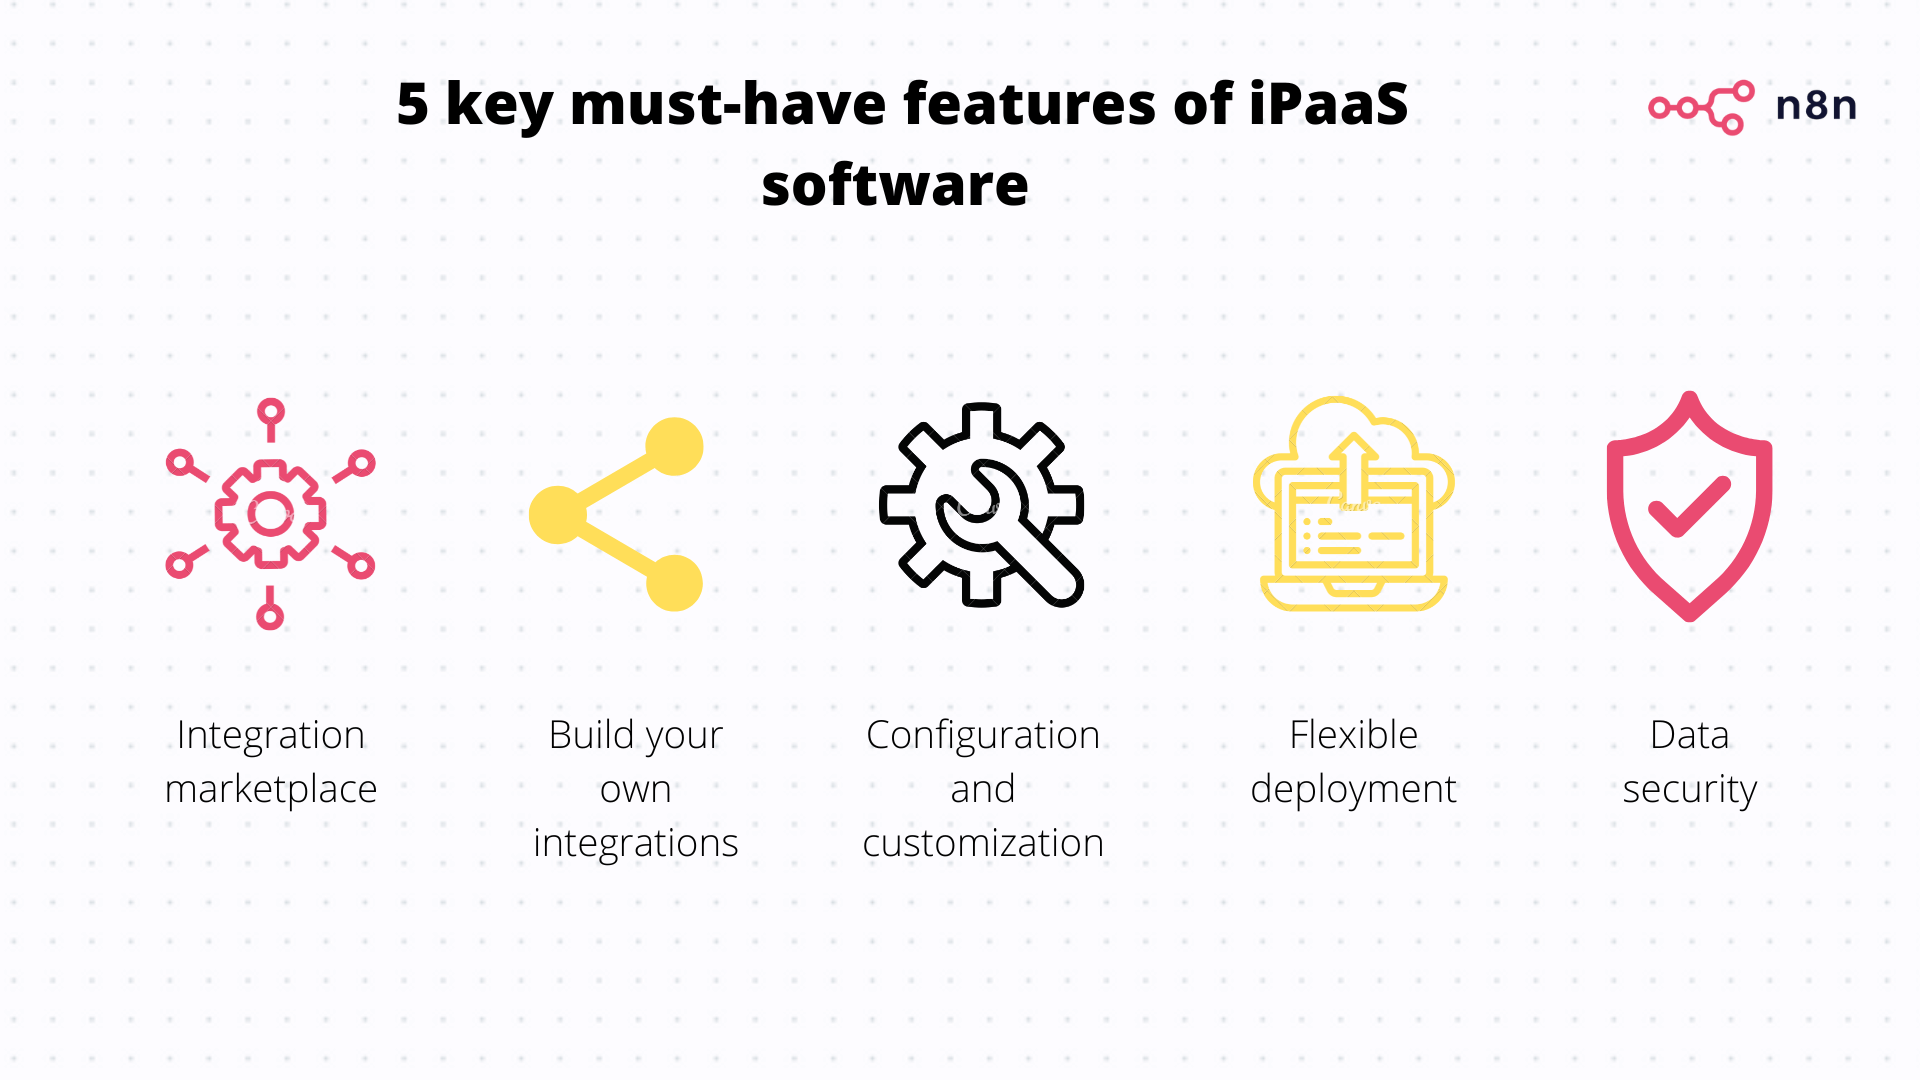 5 key must-have features of iPaaS software